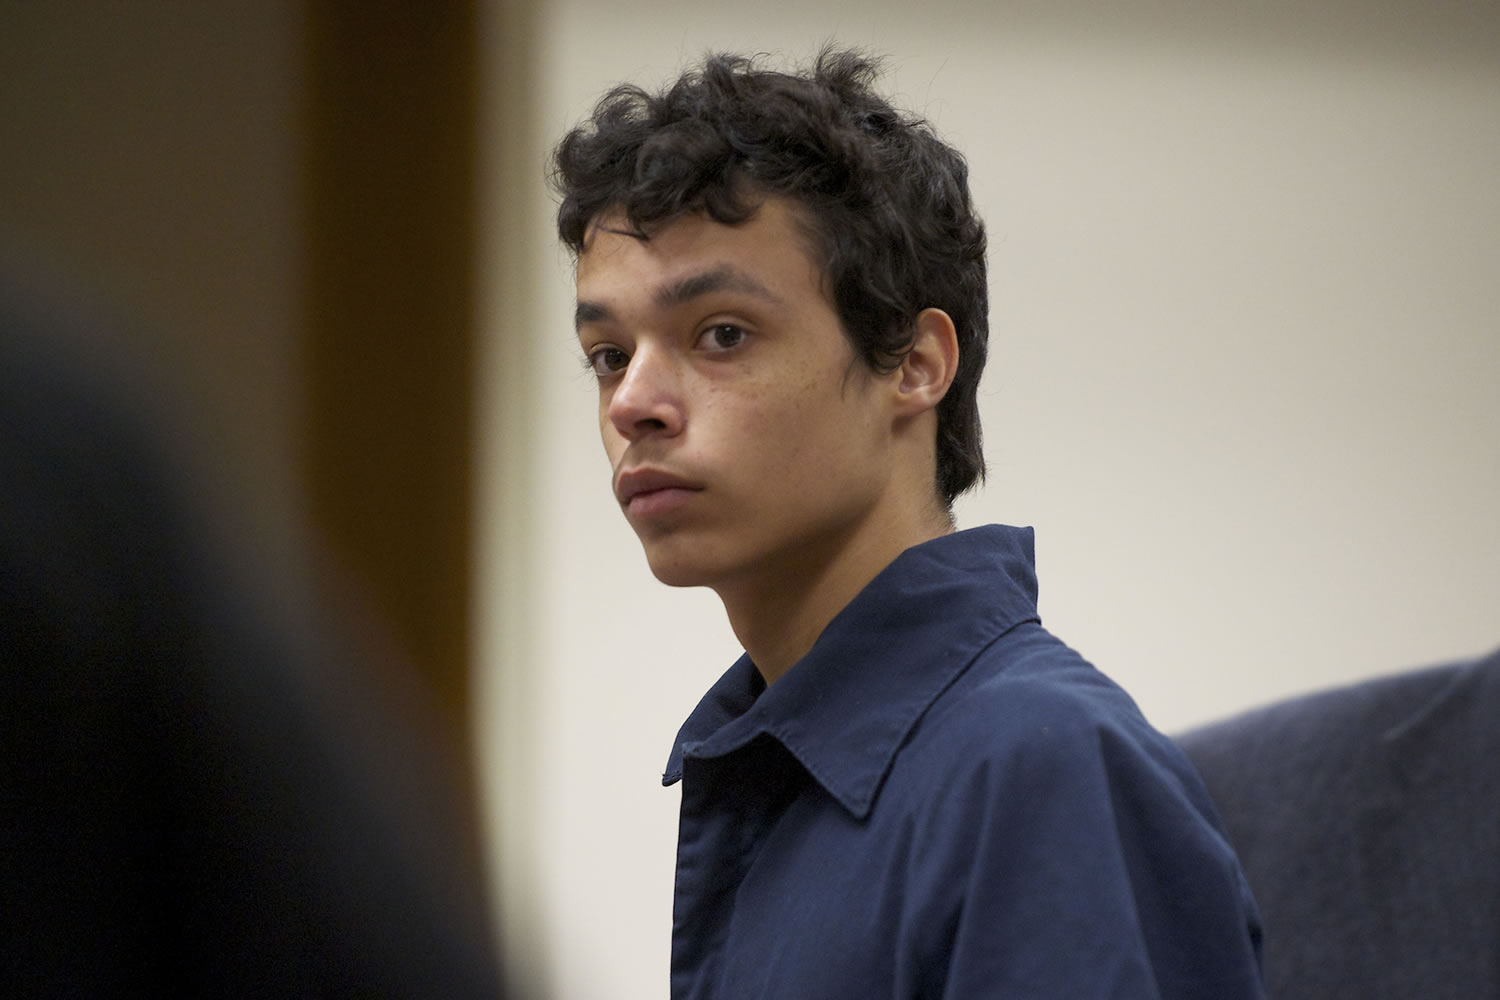 Nehemiah Rudner-Singleton, 16, pleaded guilty today in Clark County Juvenile Court on unlawful possession of a firearm and attempted second-degree assault charges. He was with Douglas E.